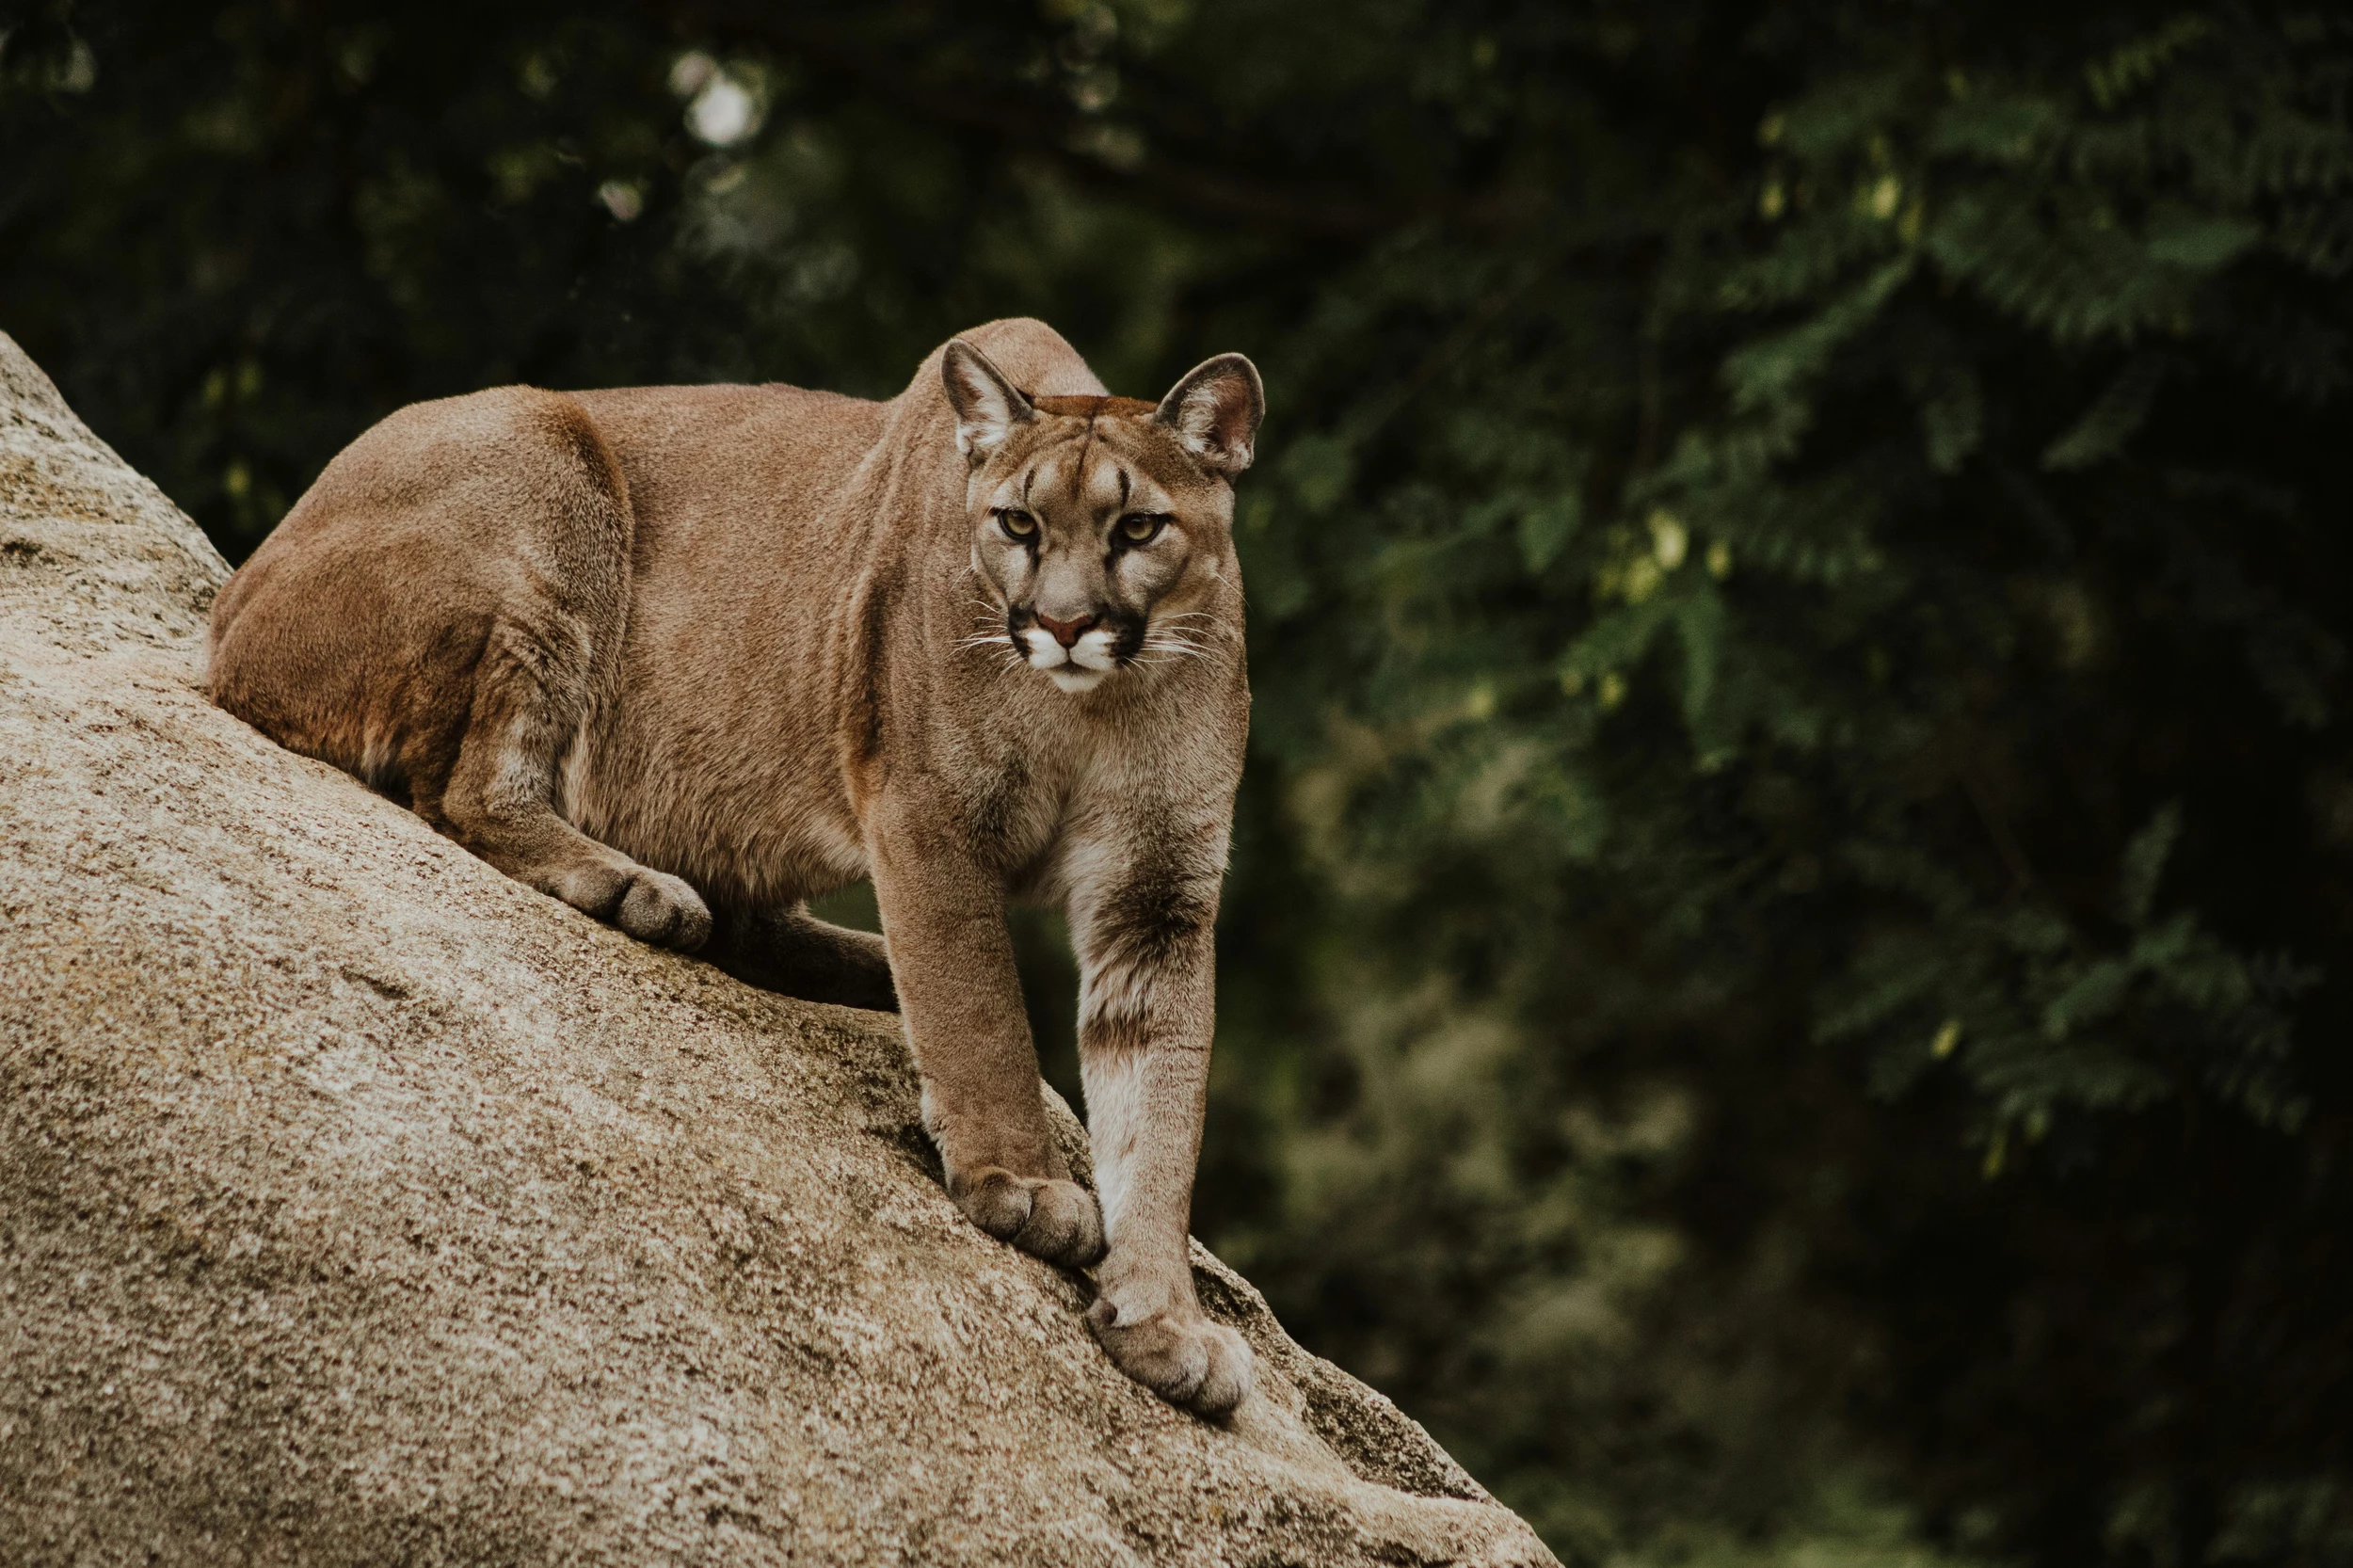 Texas Wildlife To Tackle Mountain Lion Regulations.